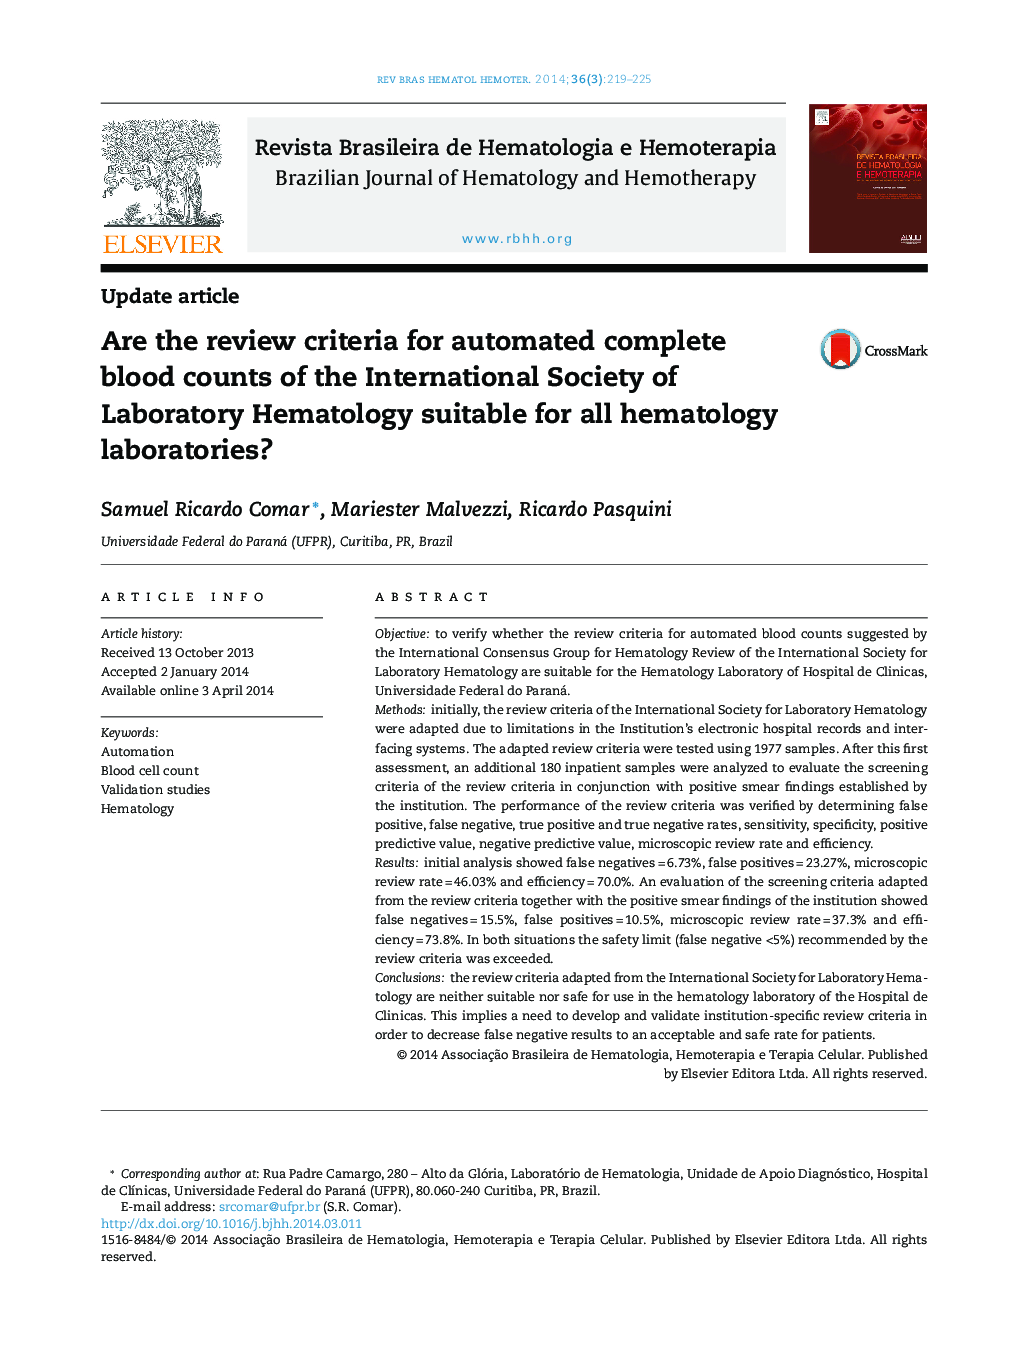 Are the review criteria for automated complete blood counts of the International Society of Laboratory Hematology suitable for all hematology laboratories?